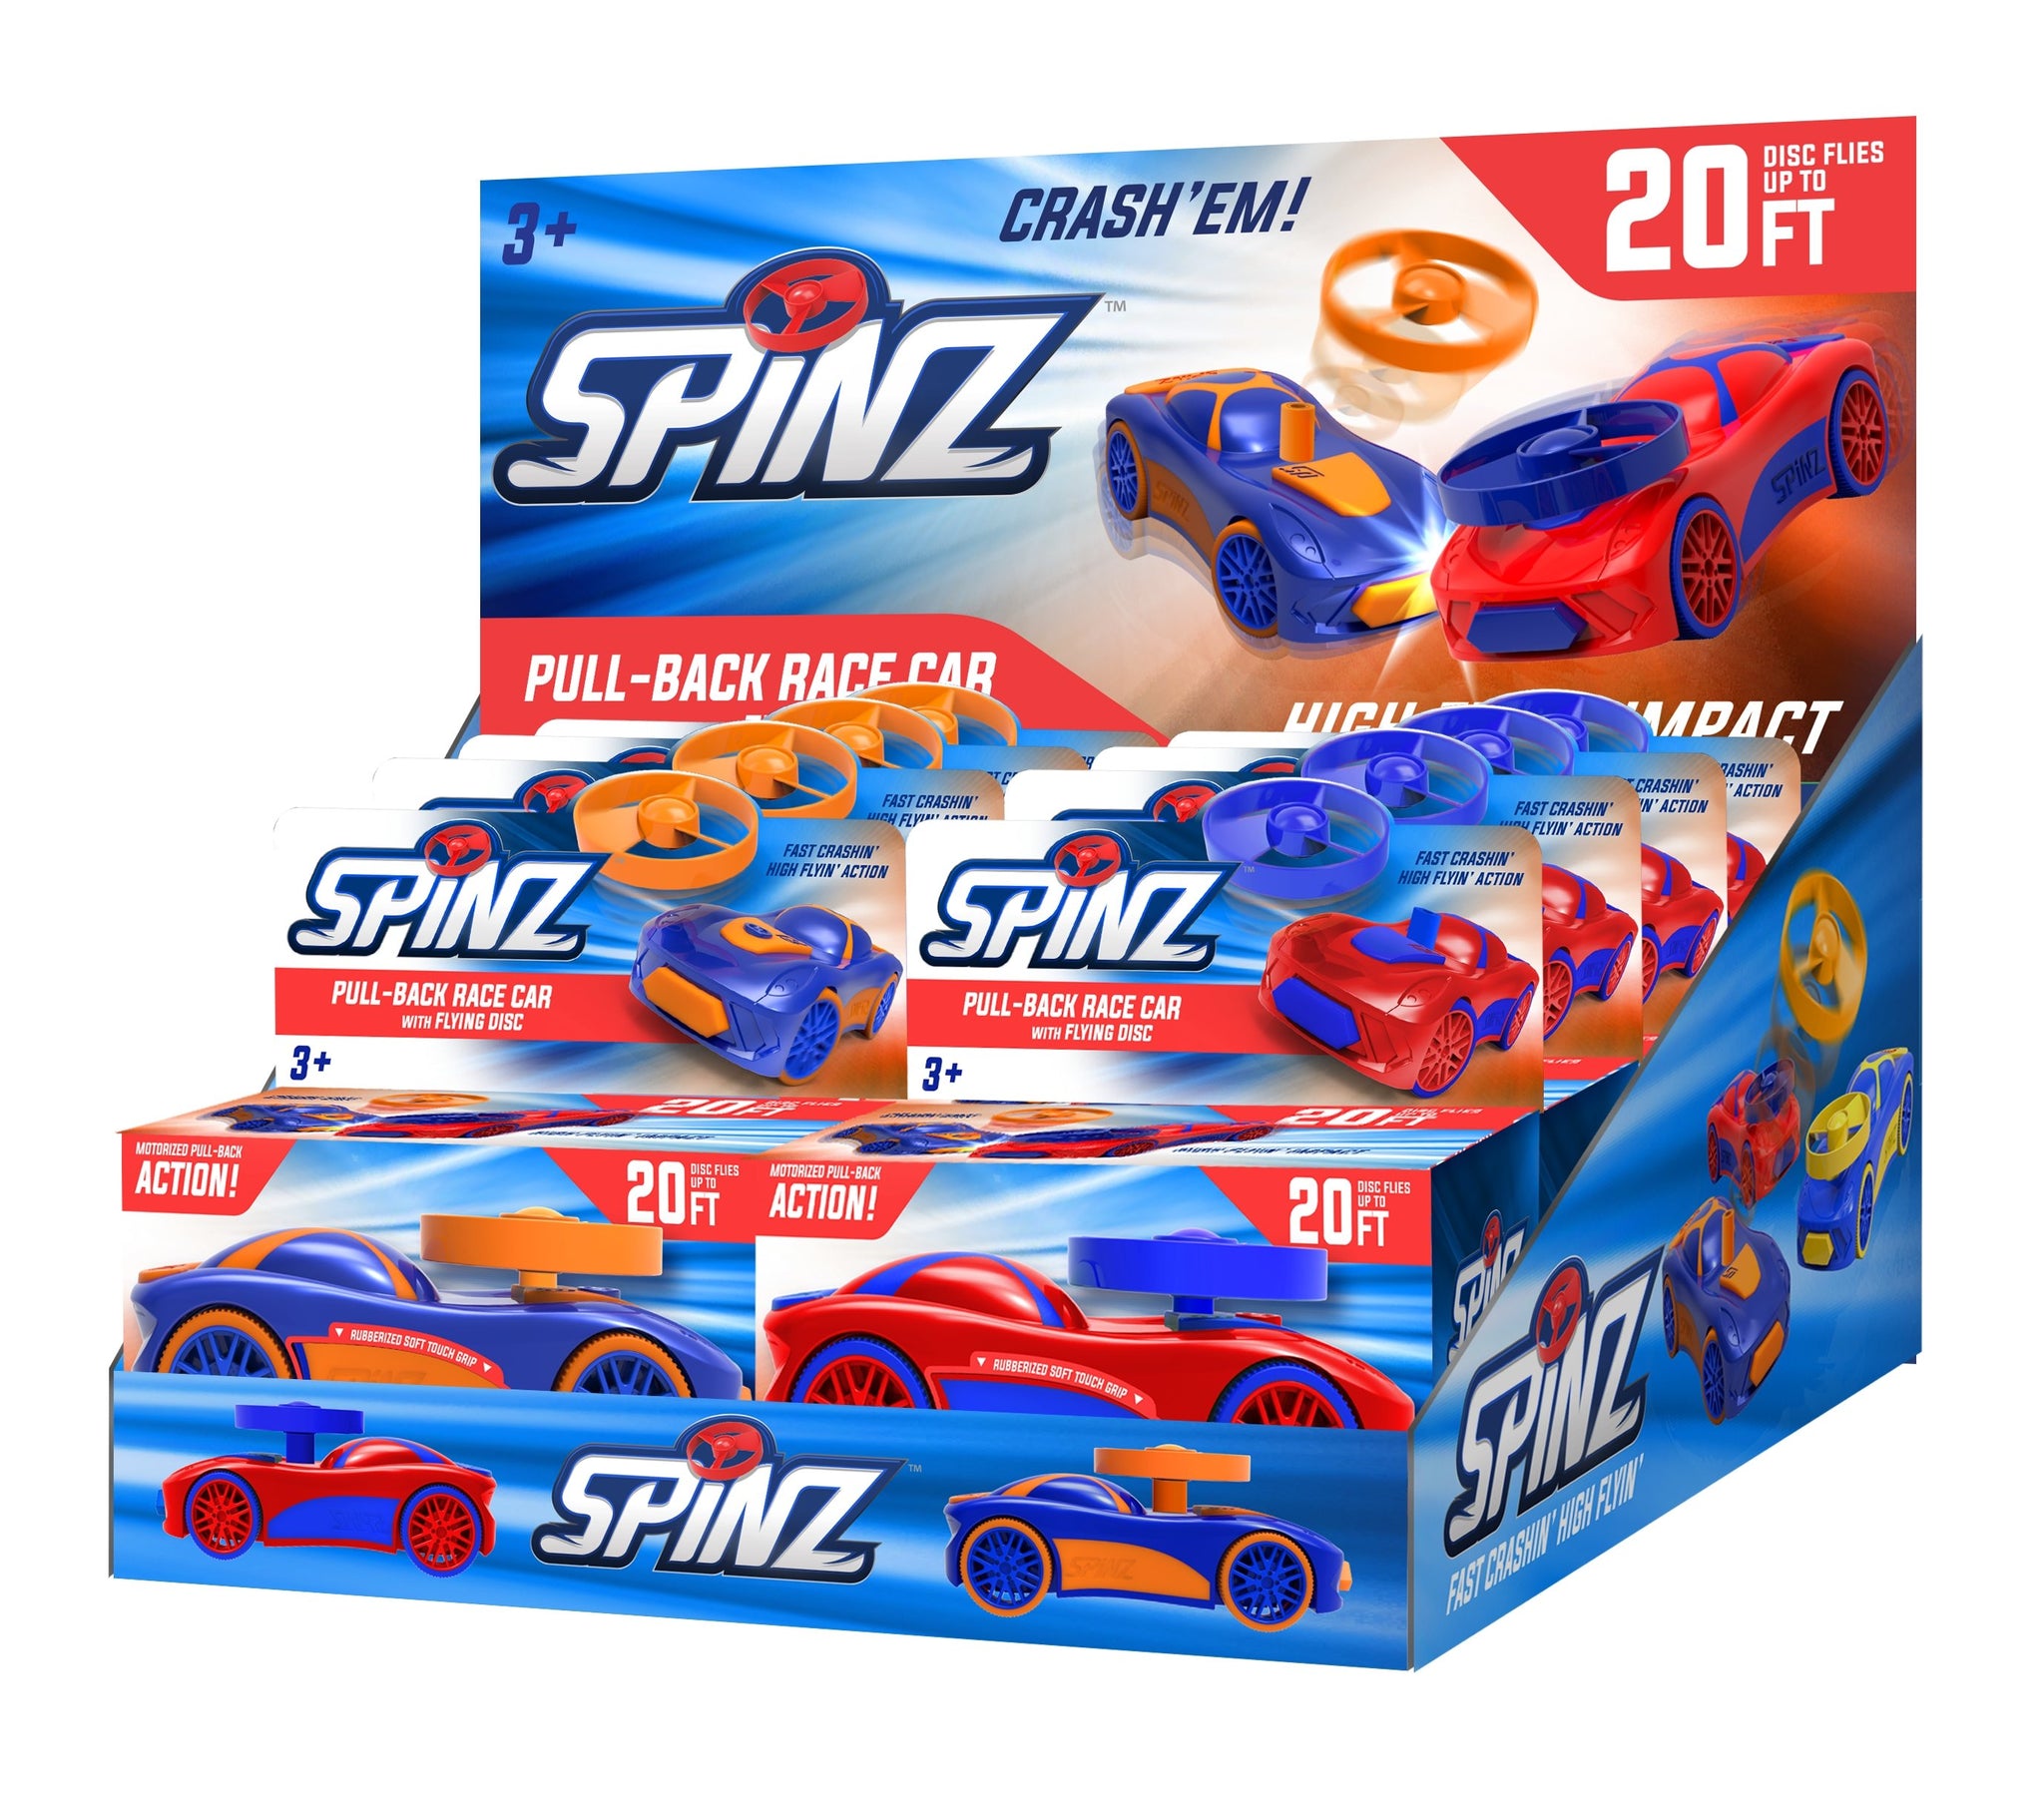 Spinz Race Car - Rise and Redemption